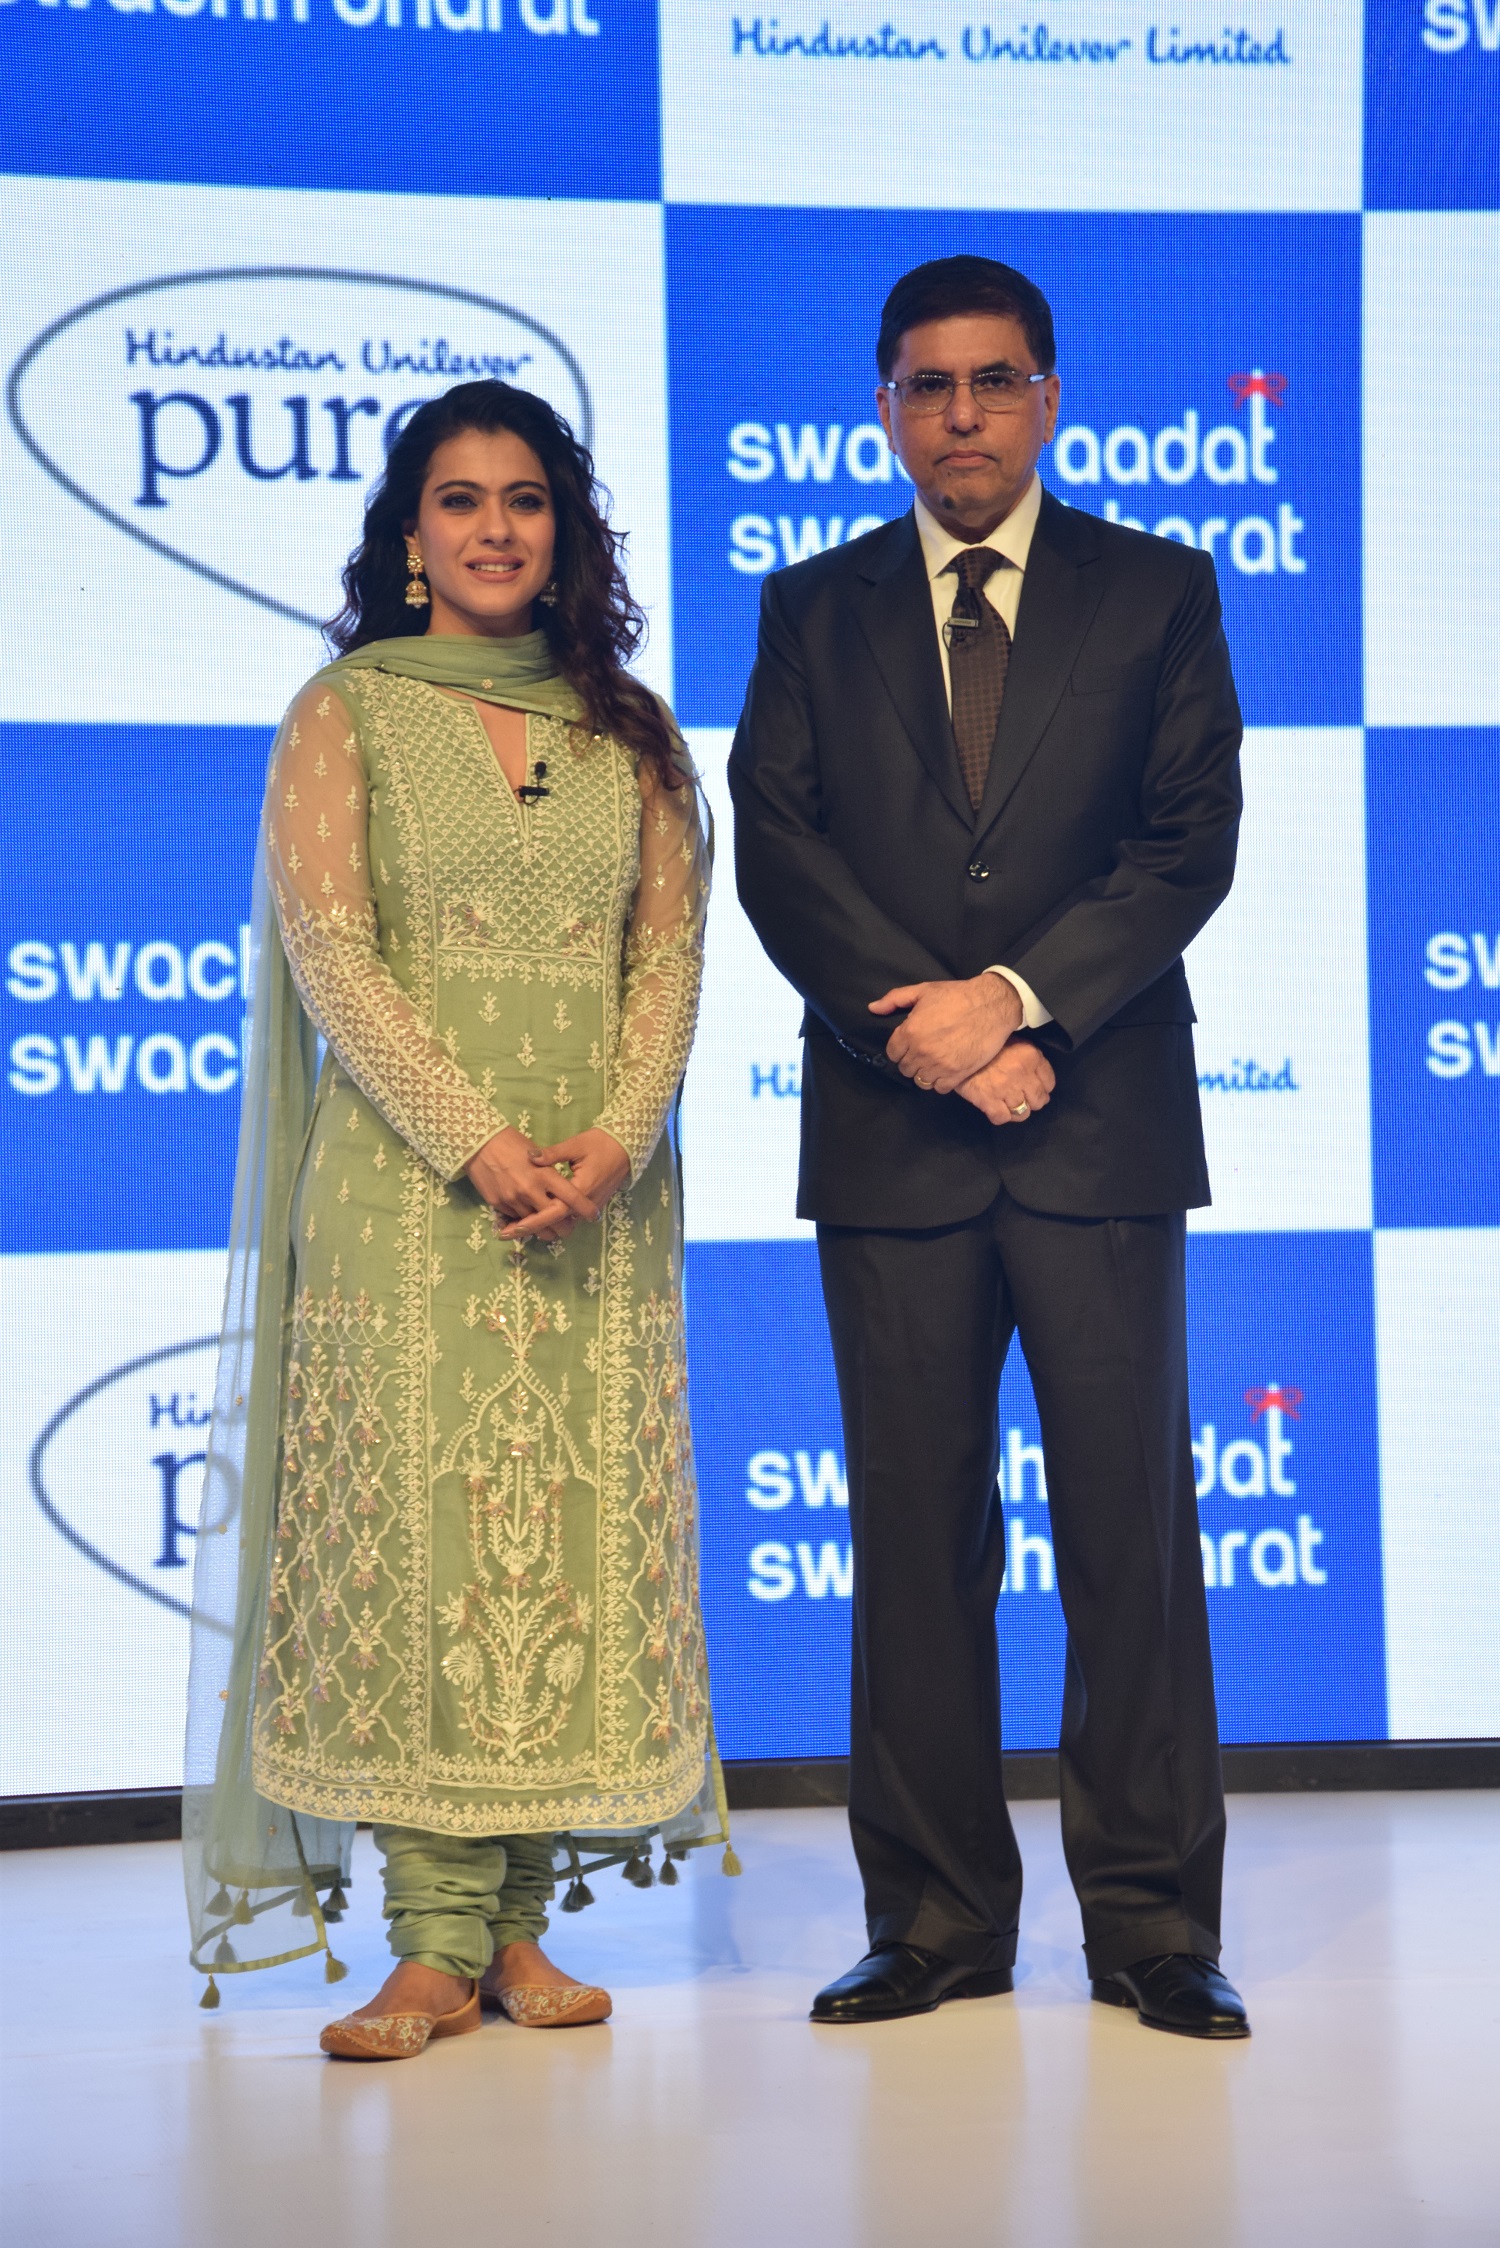 Swachh Aadat Swachh Bharat Advocacy Amabassador Kajol along with Sanjiv Mehta, CEO and Managing Director, Hindustan Unilever Limited / GPN